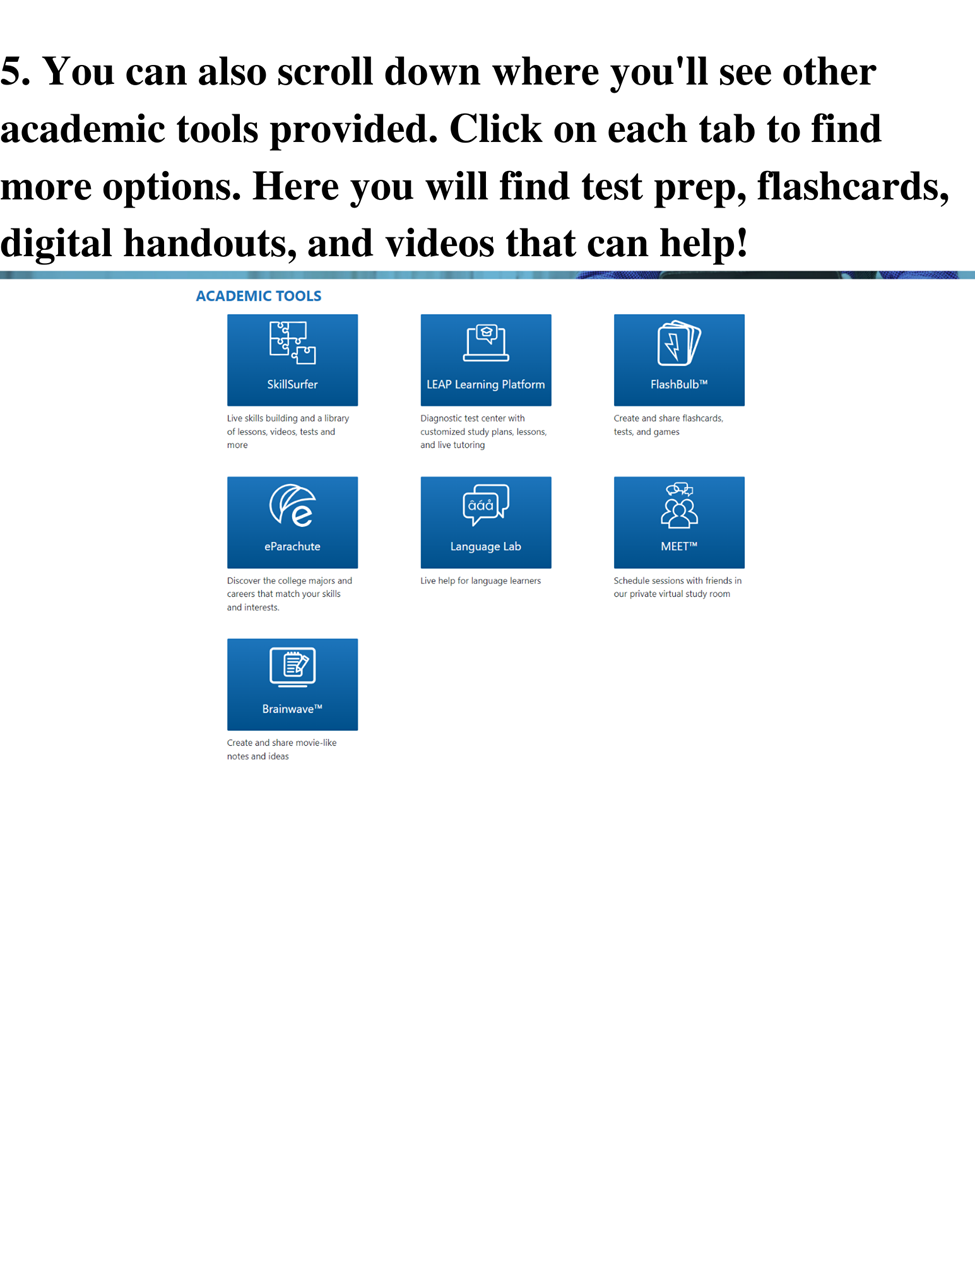 image shows other academic tools provided